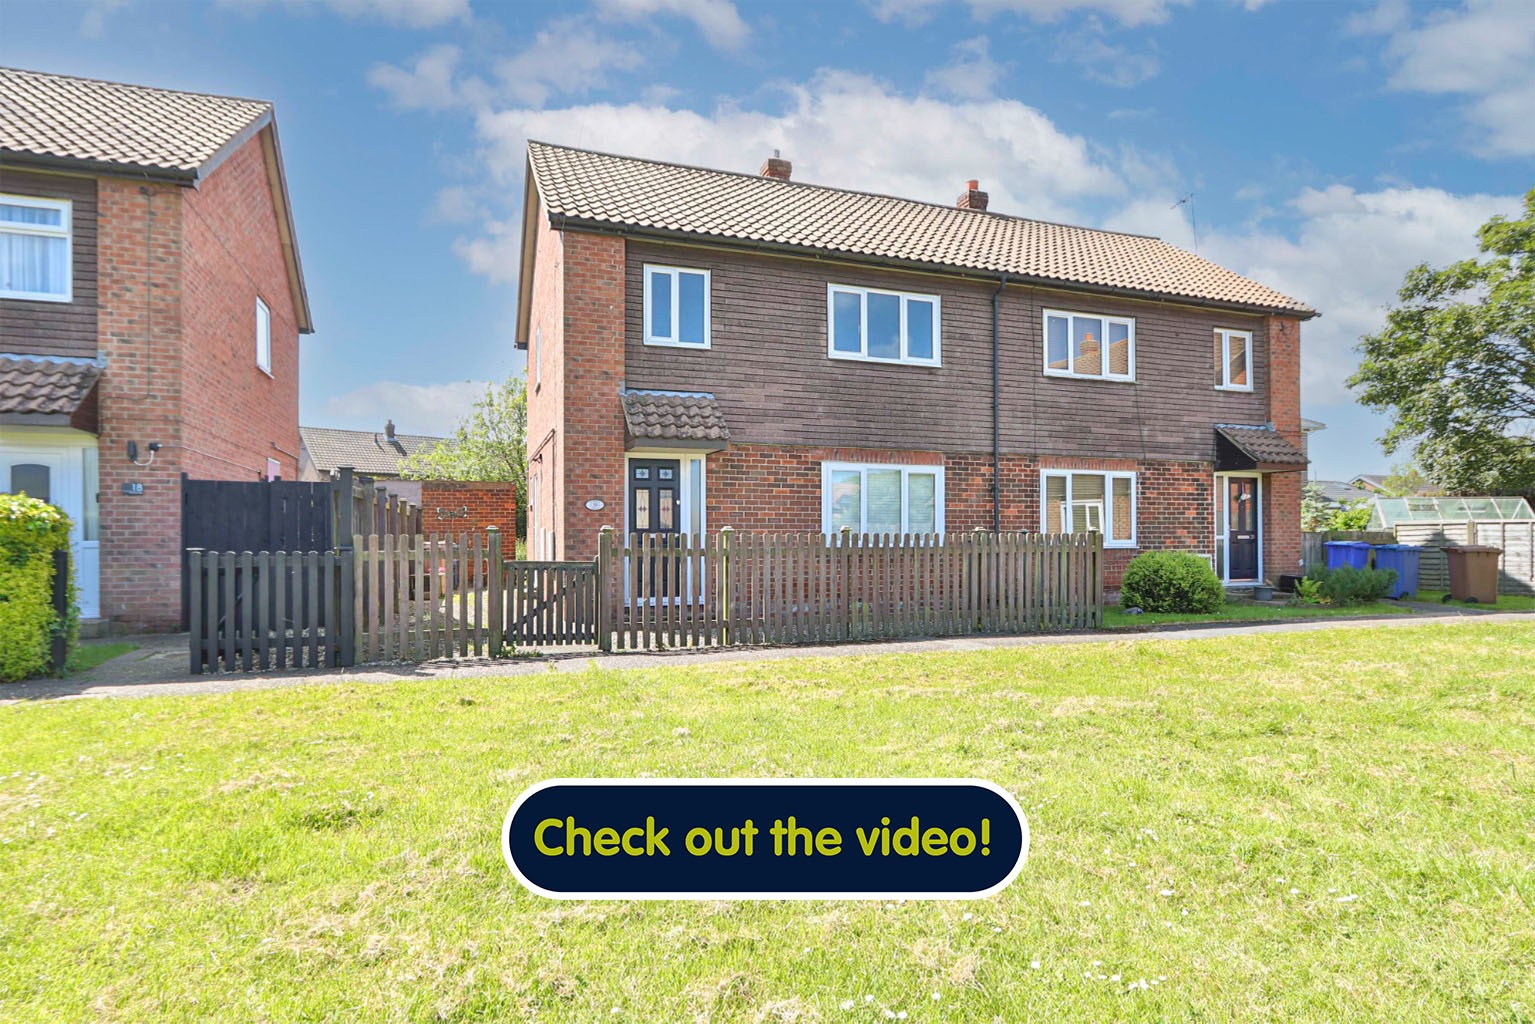 3 bed semi-detached house for sale in Pinfold Villas, Hull - Property Image 1